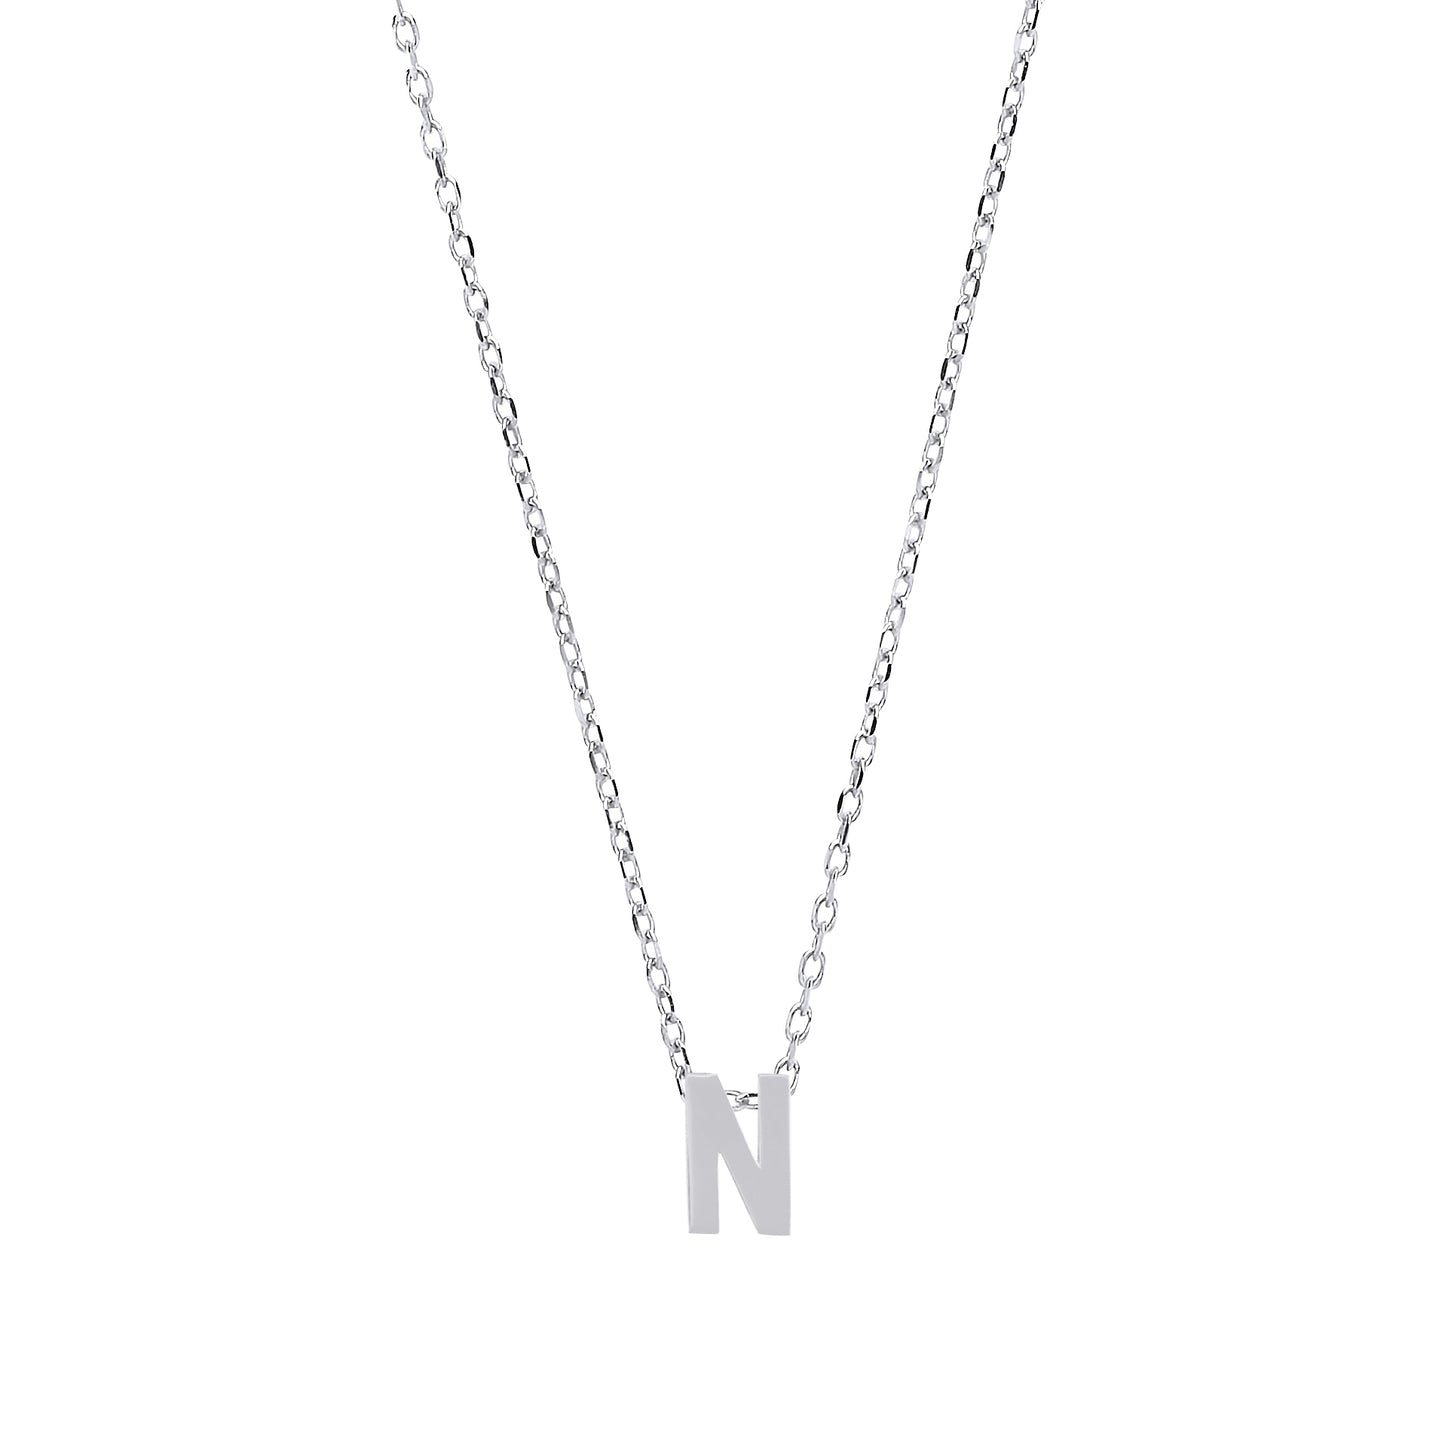 Silver  Letter N Initial Pendant Necklace 18 inch - GIN4N